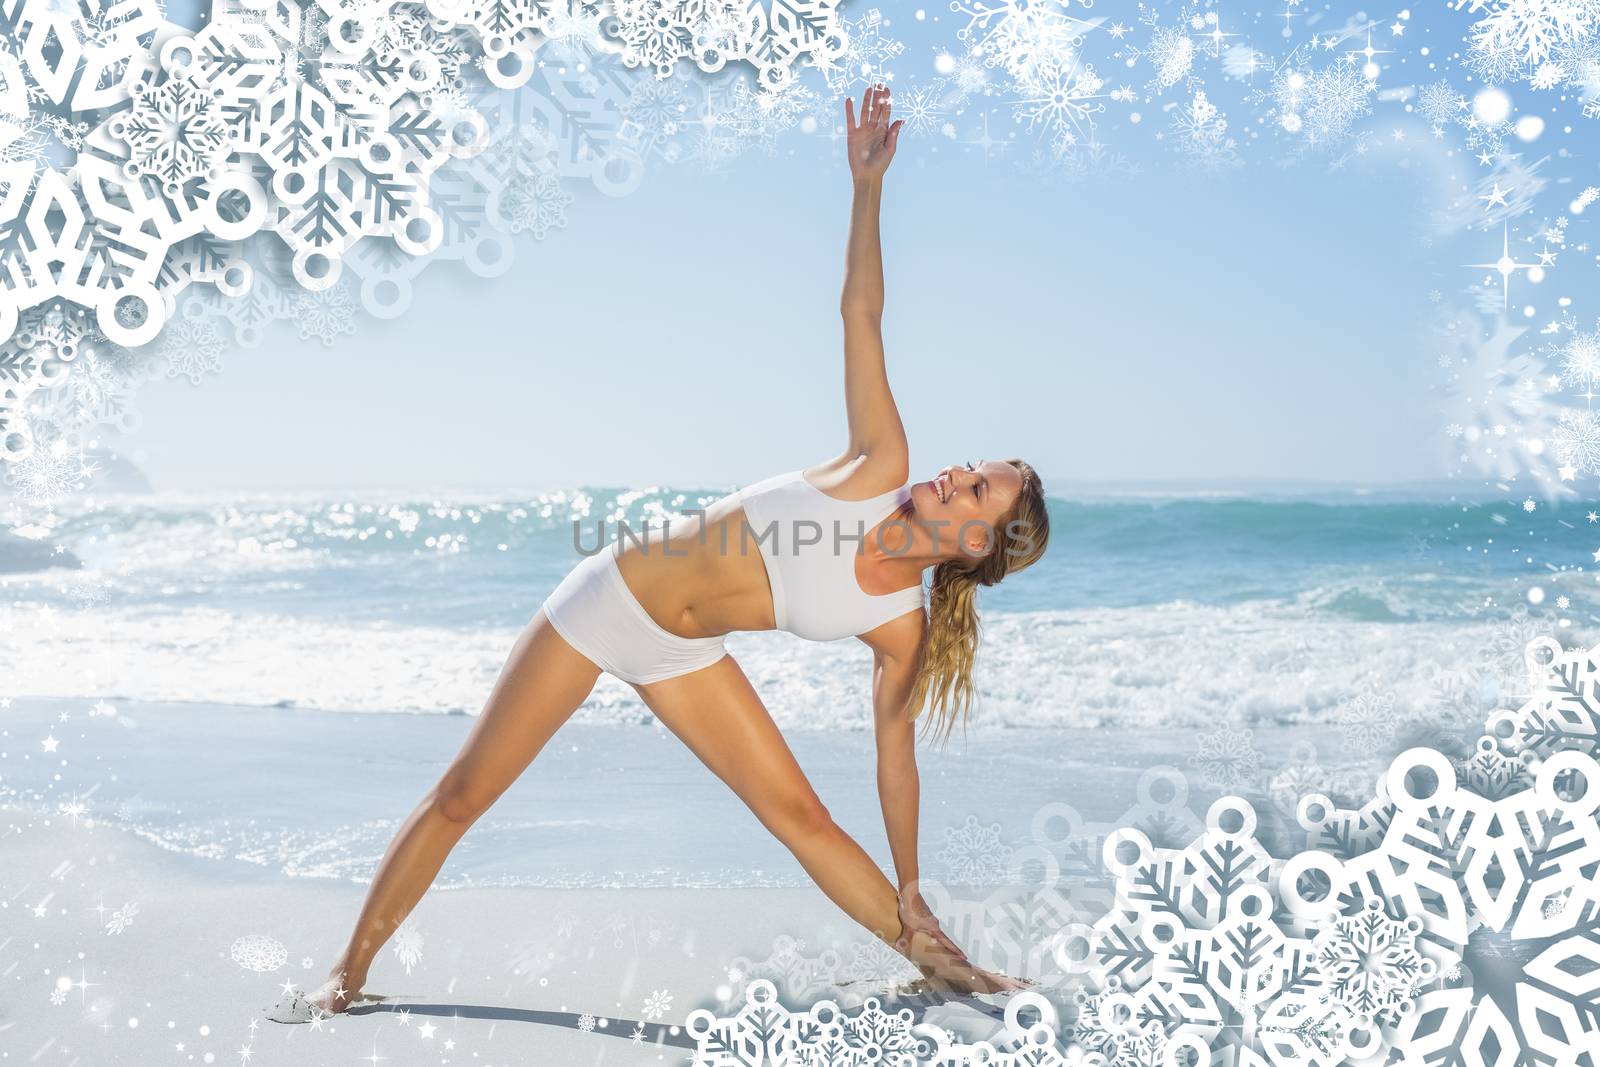 Gorgeous blonde standing in extended triangle pose by the sea against snow